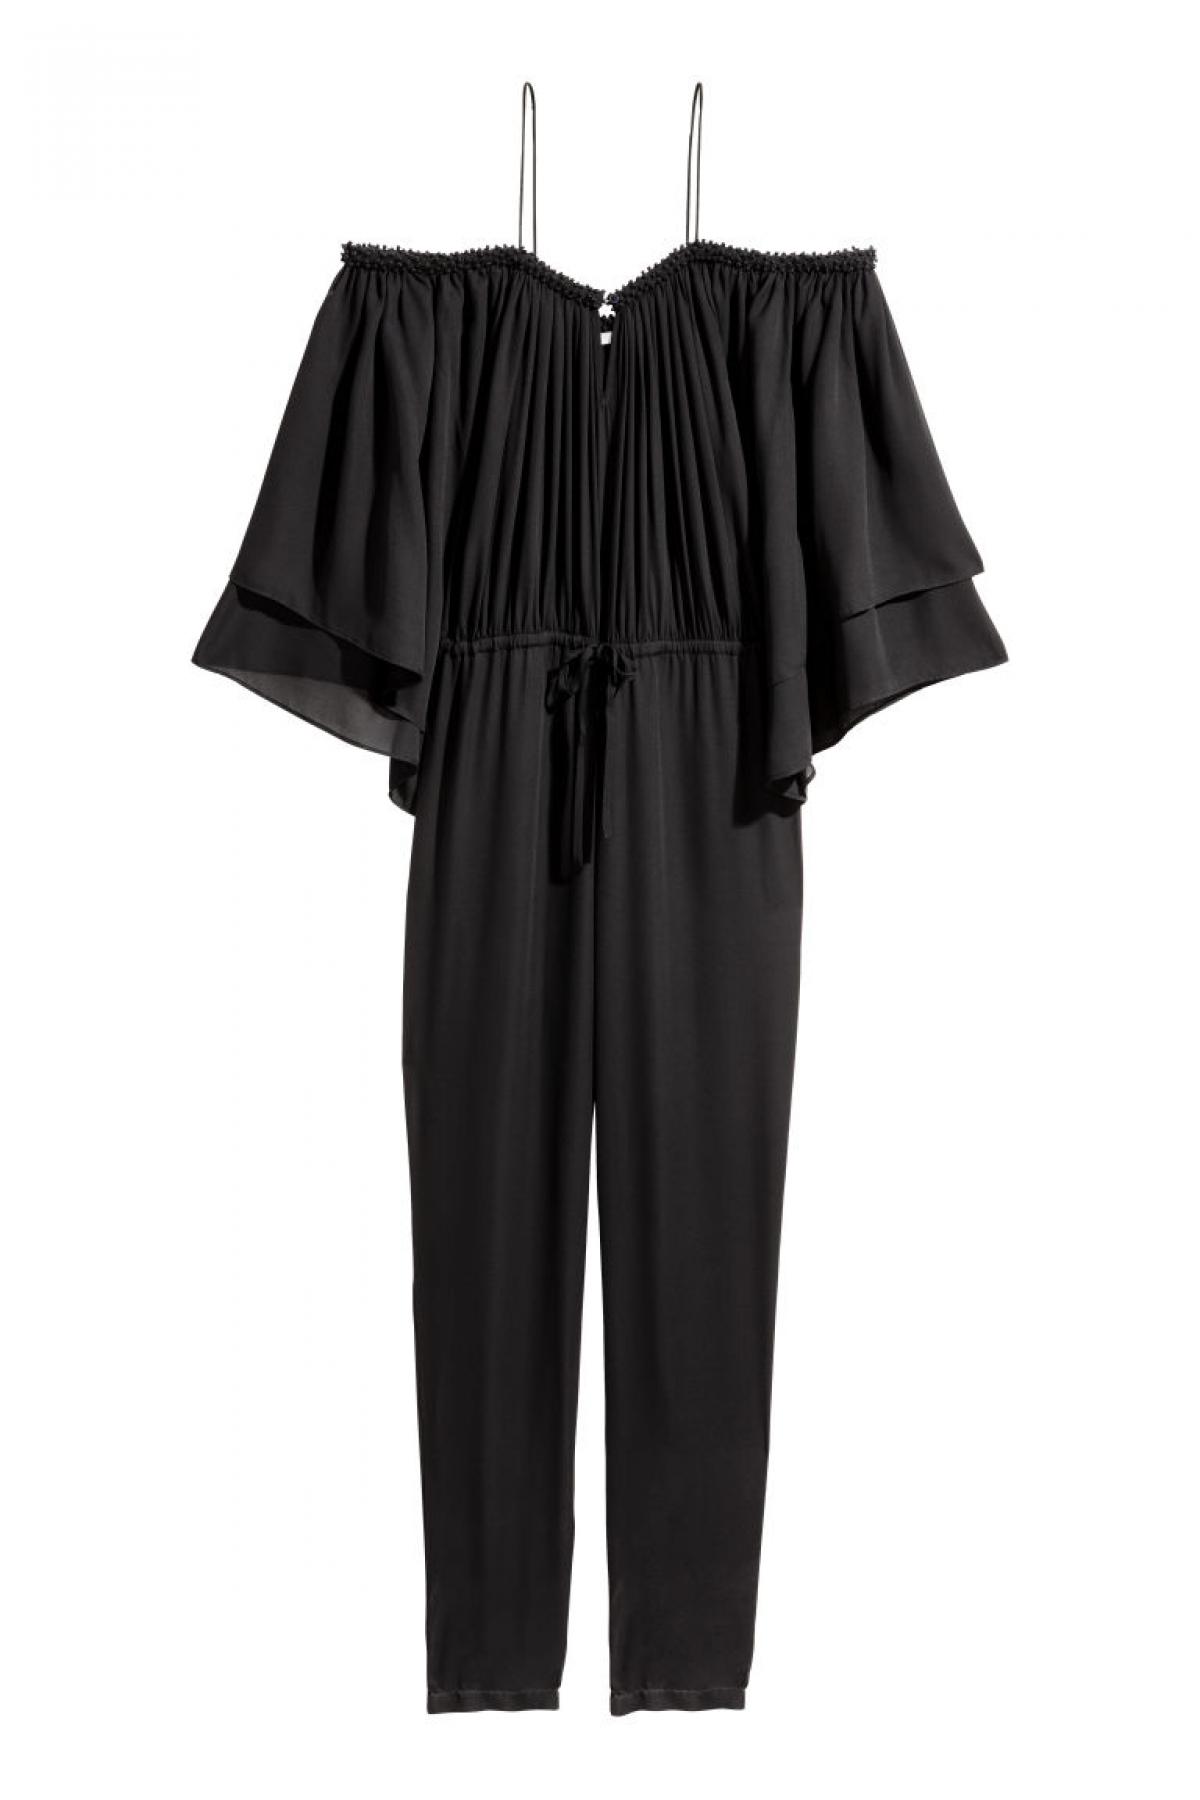 h&m jumpsuits south africa